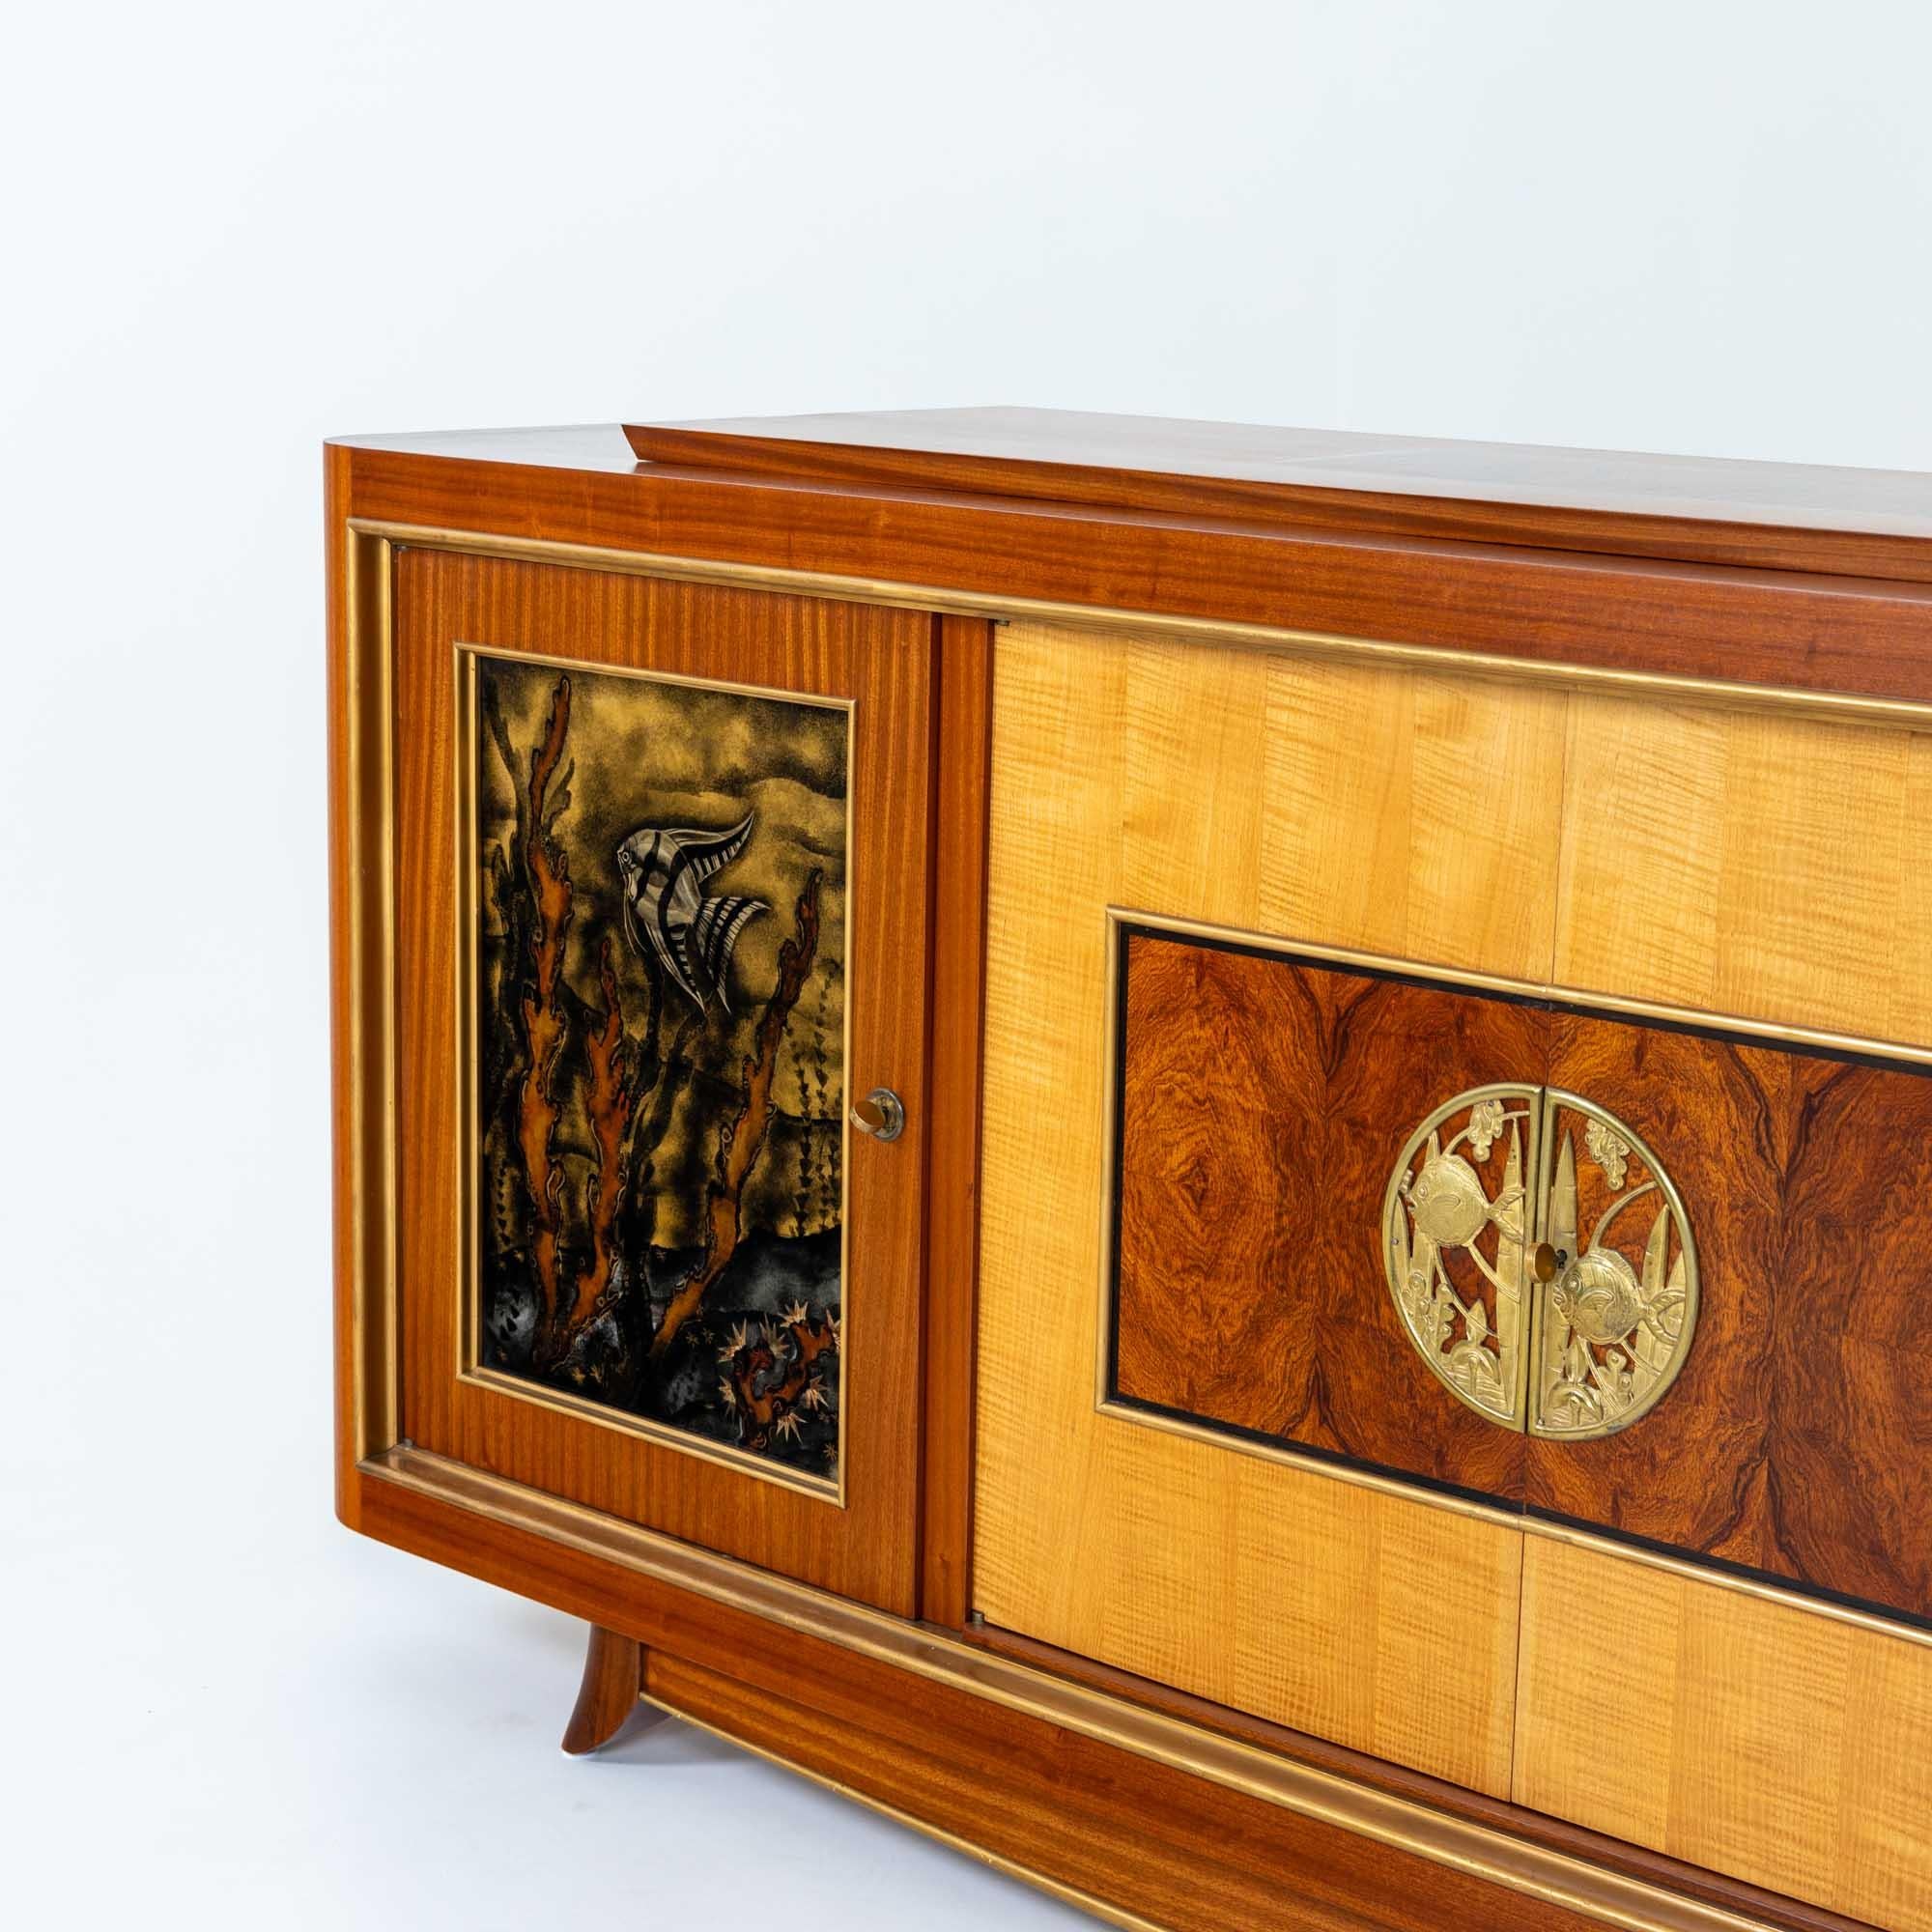 Hand-Painted Art Deco Sideboard with Reverse Glass Painted Panels of Fish, France around 1930 For Sale